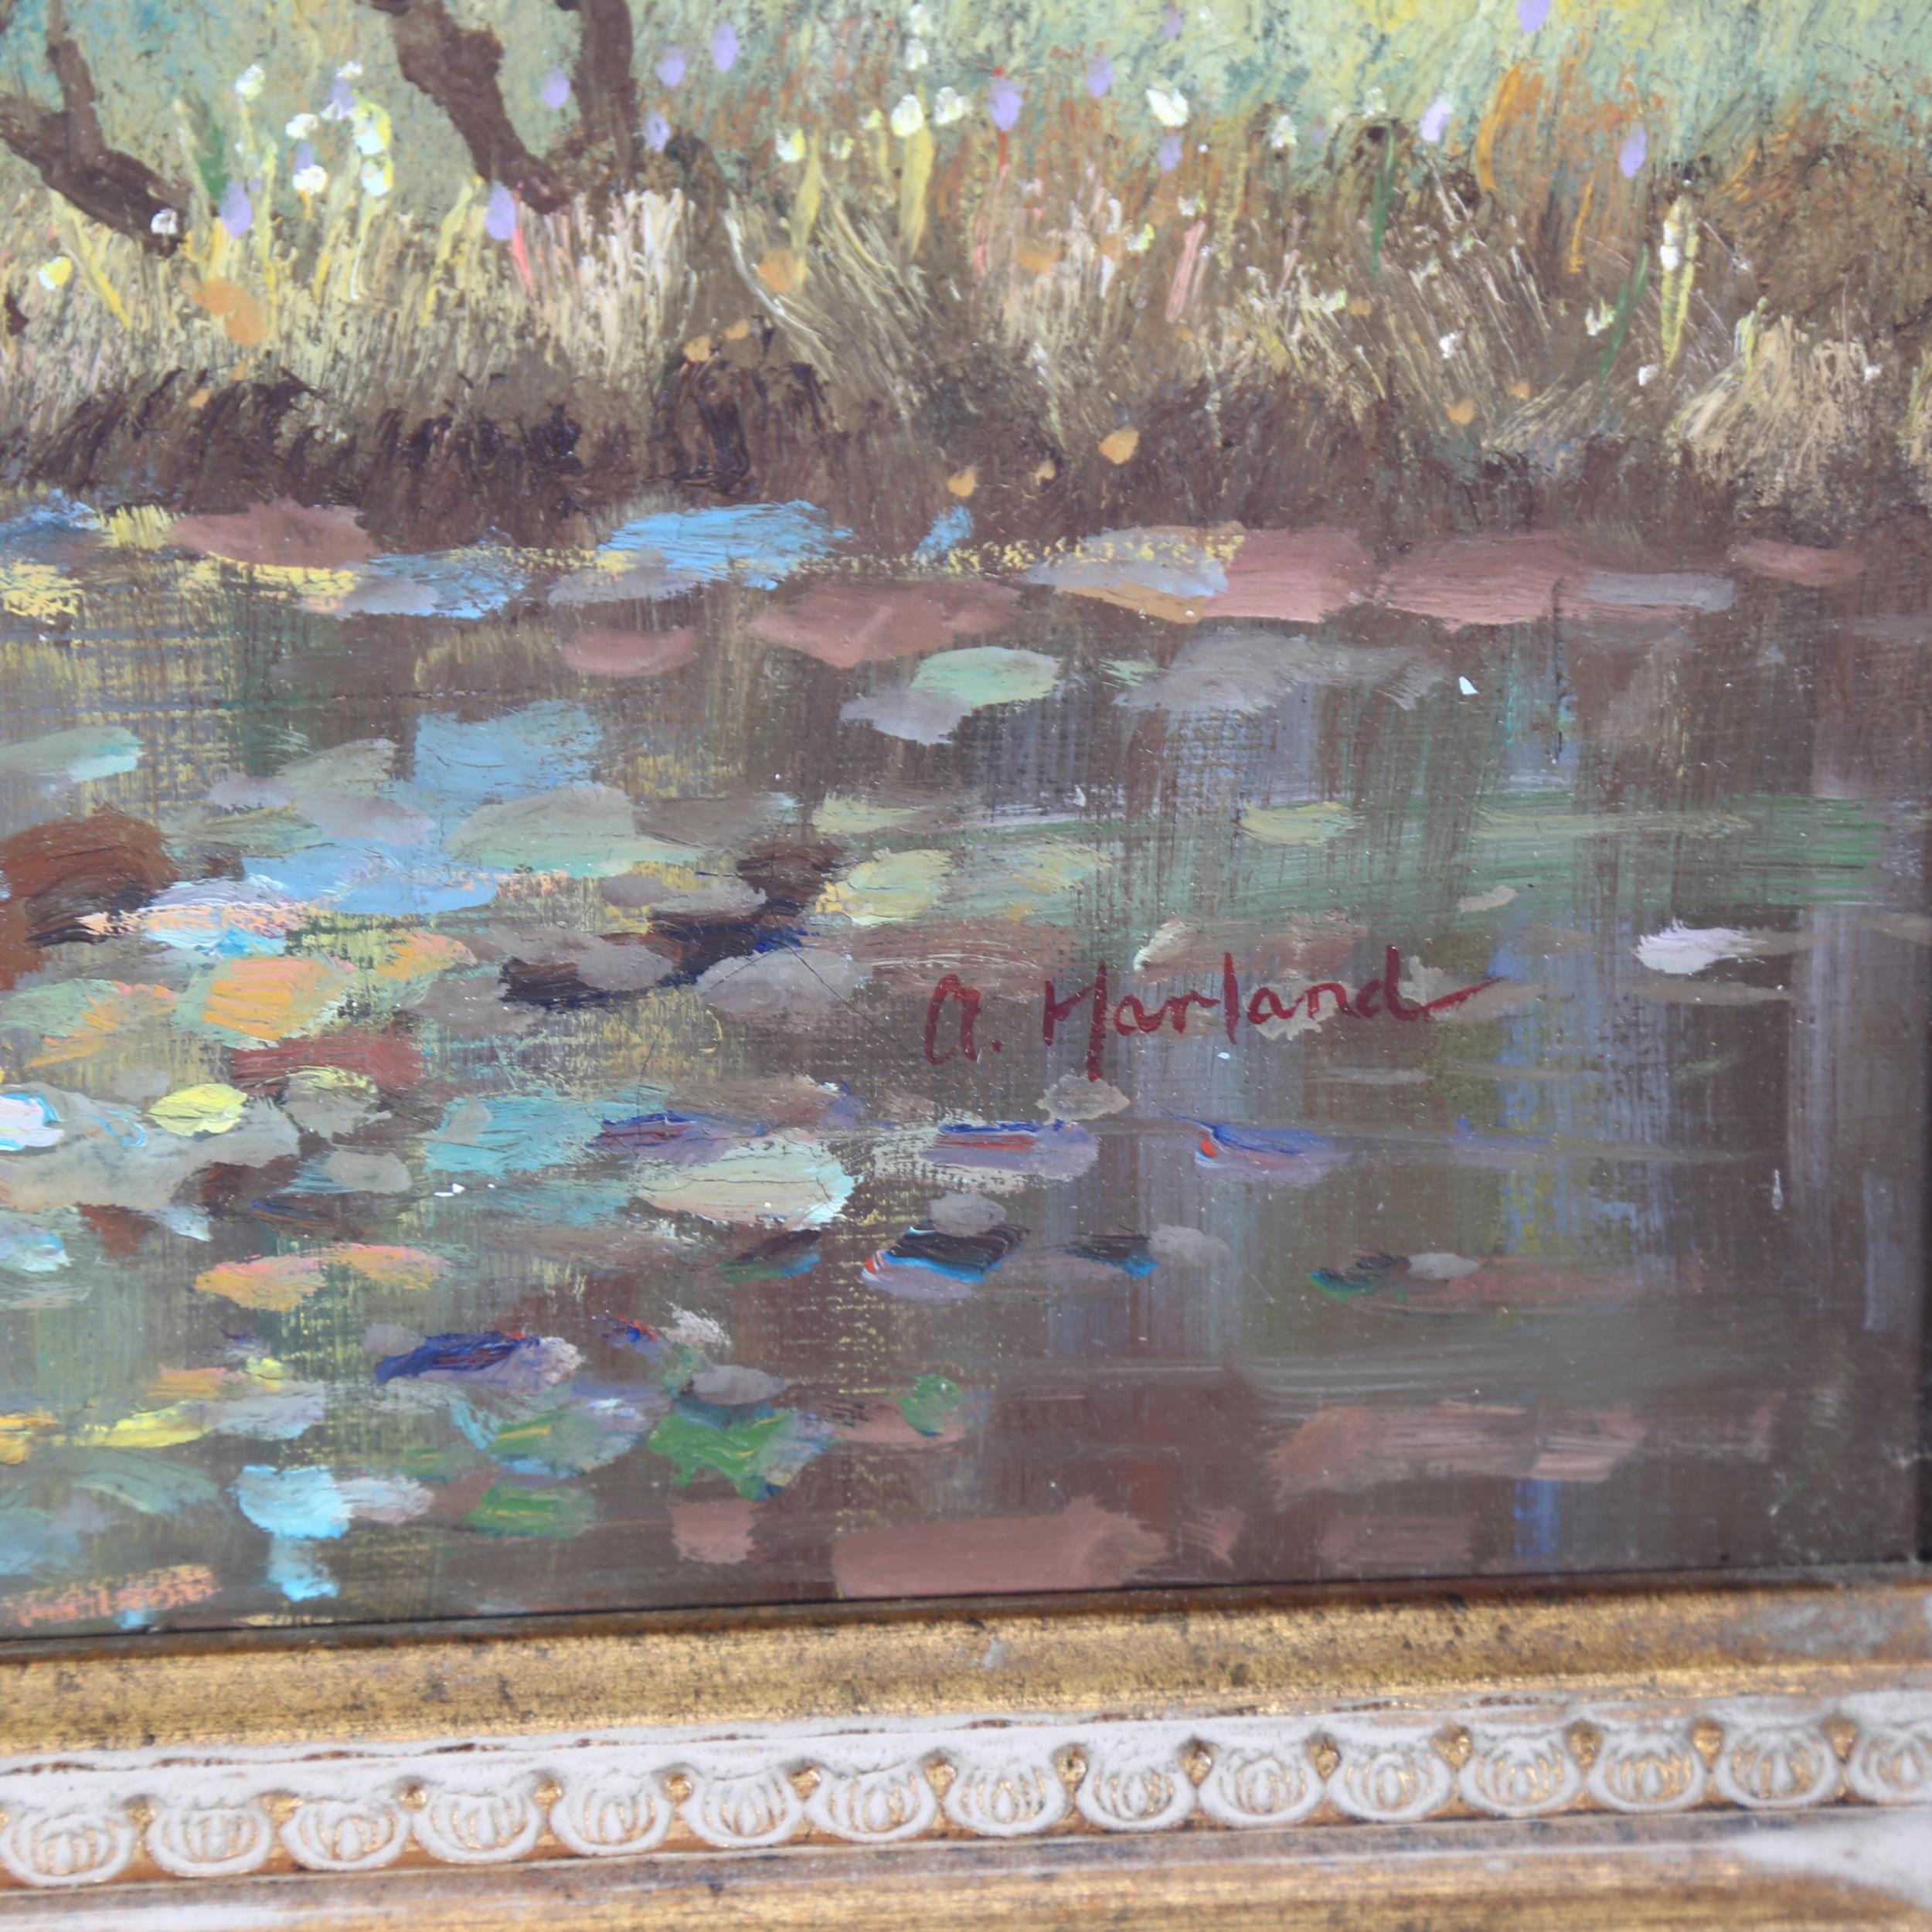 A Harland, oil on canvas, swans of the river, image 50cm x 74cm, 65cm x 90cm overall, gilt-framed - Image 2 of 2